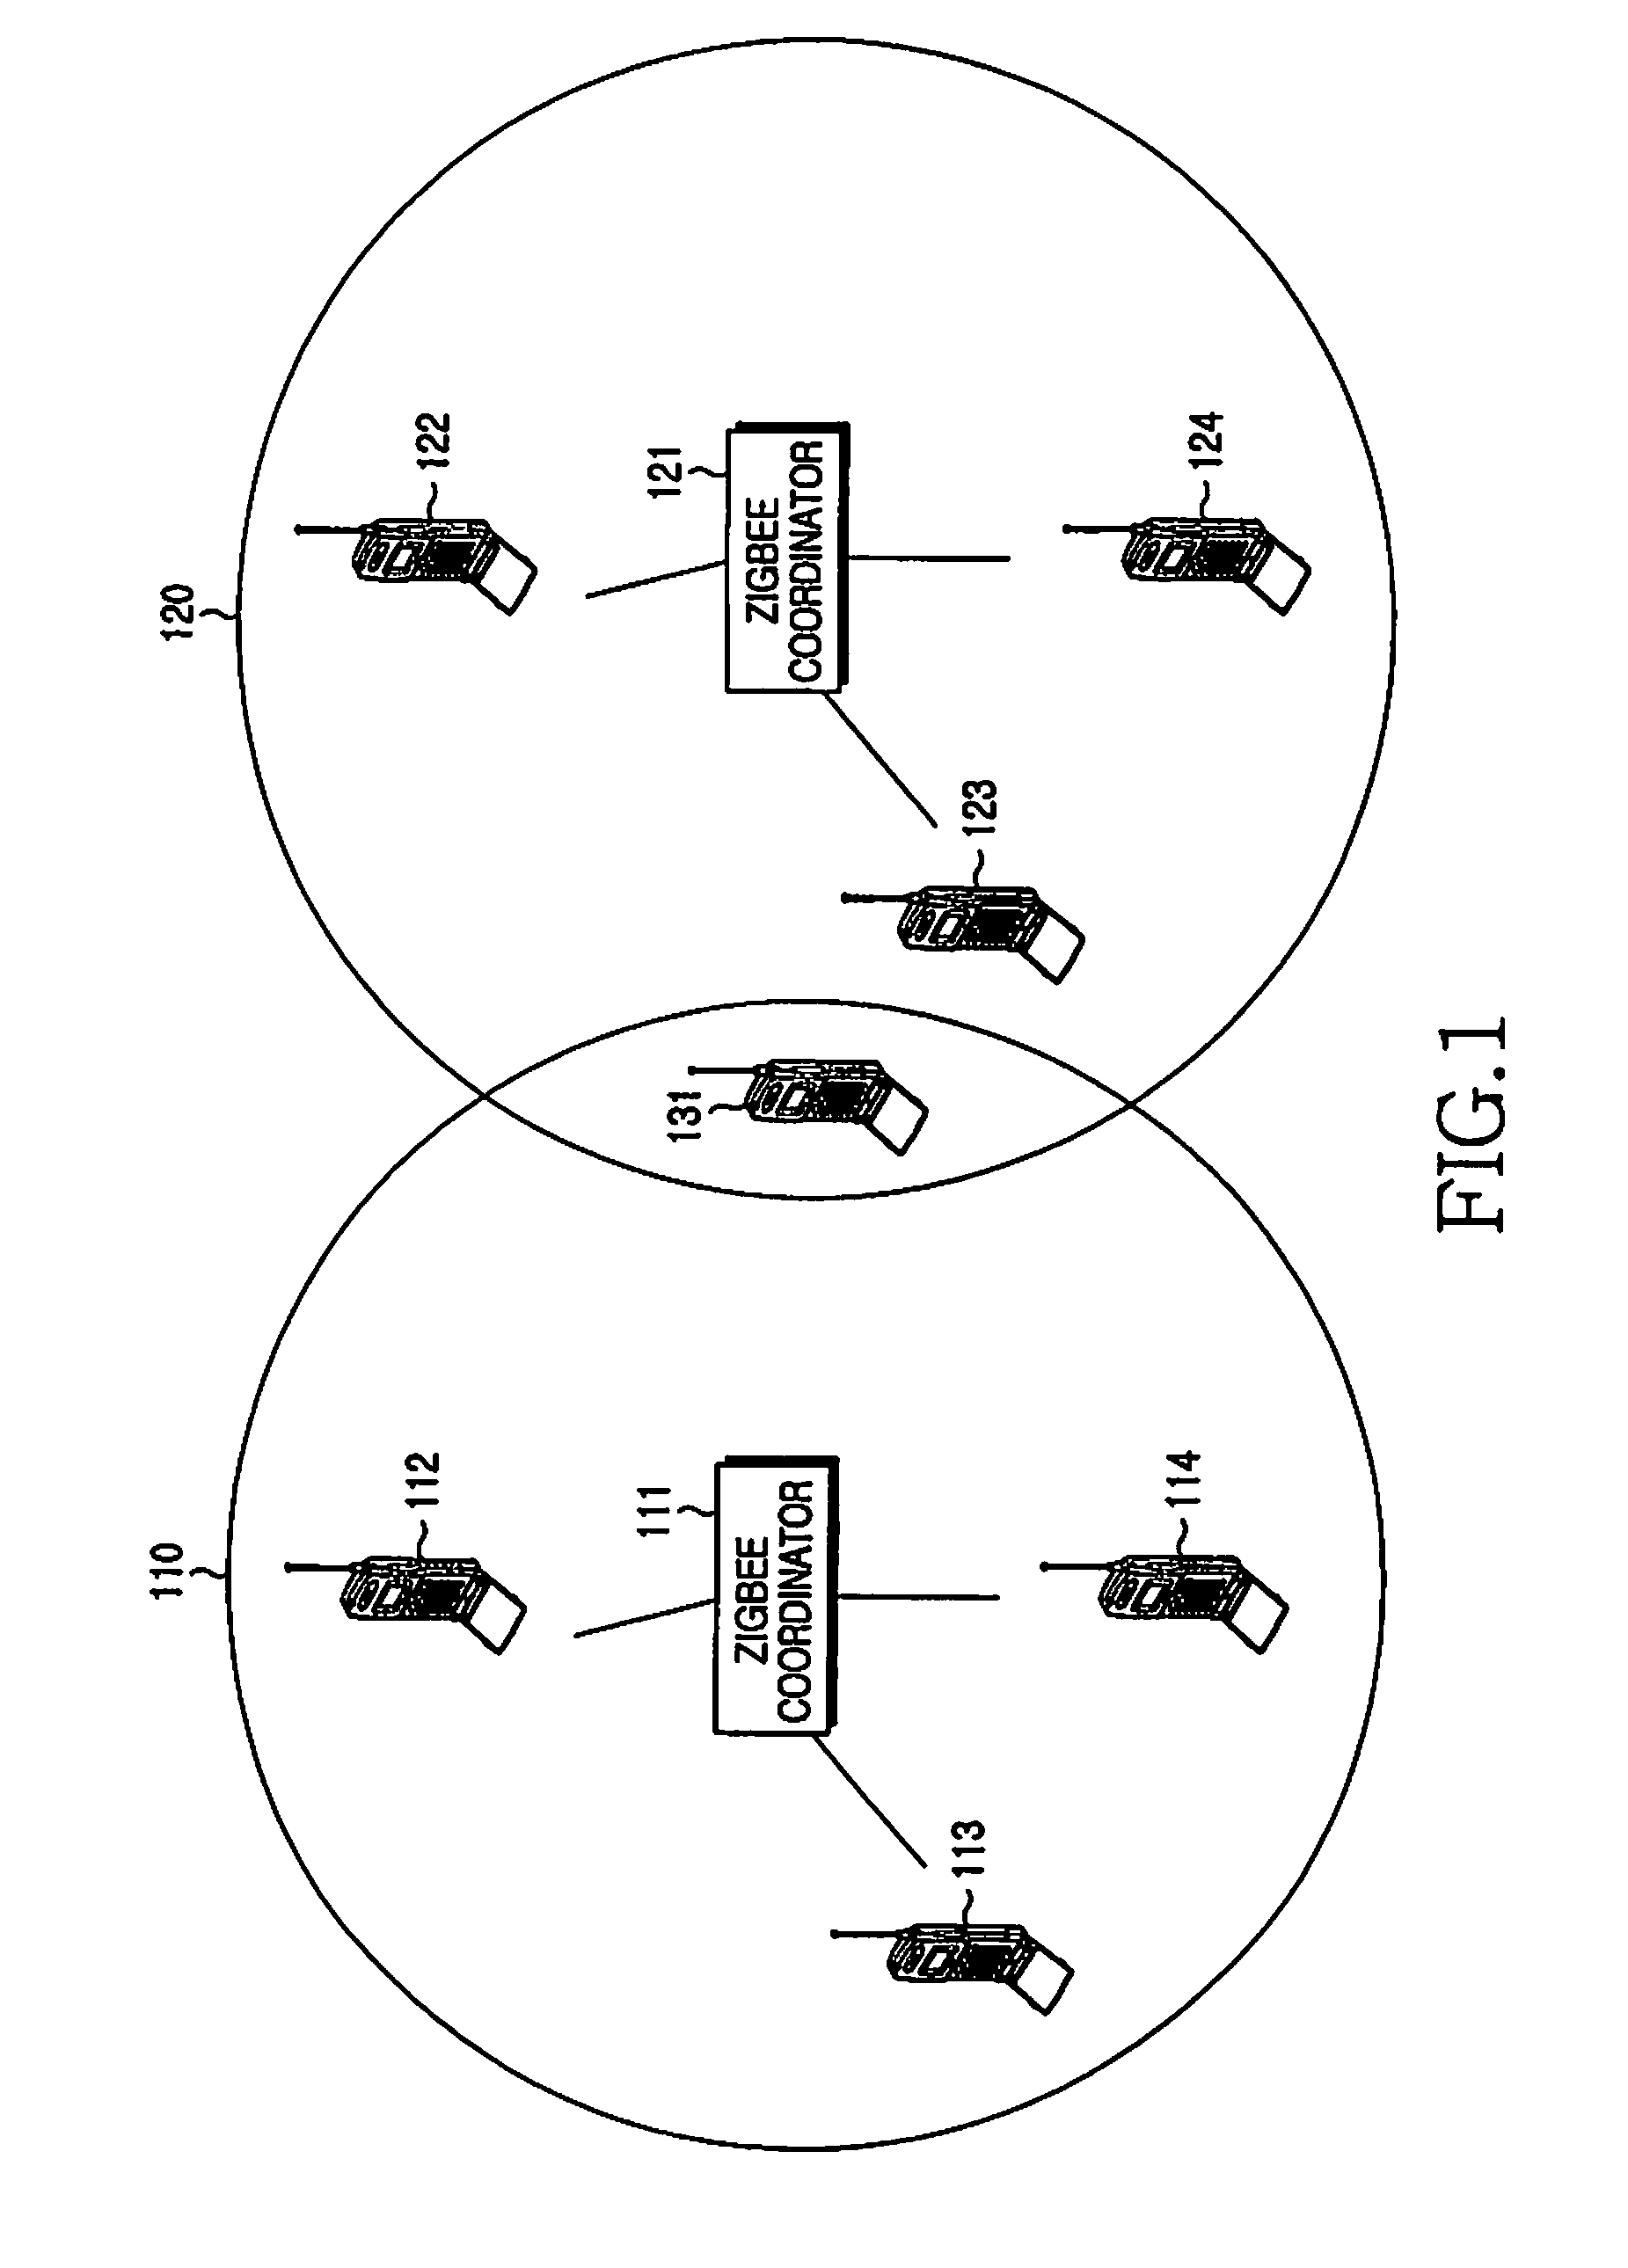 System and method of zigbee communication for selecting and gaining access to zigbee network